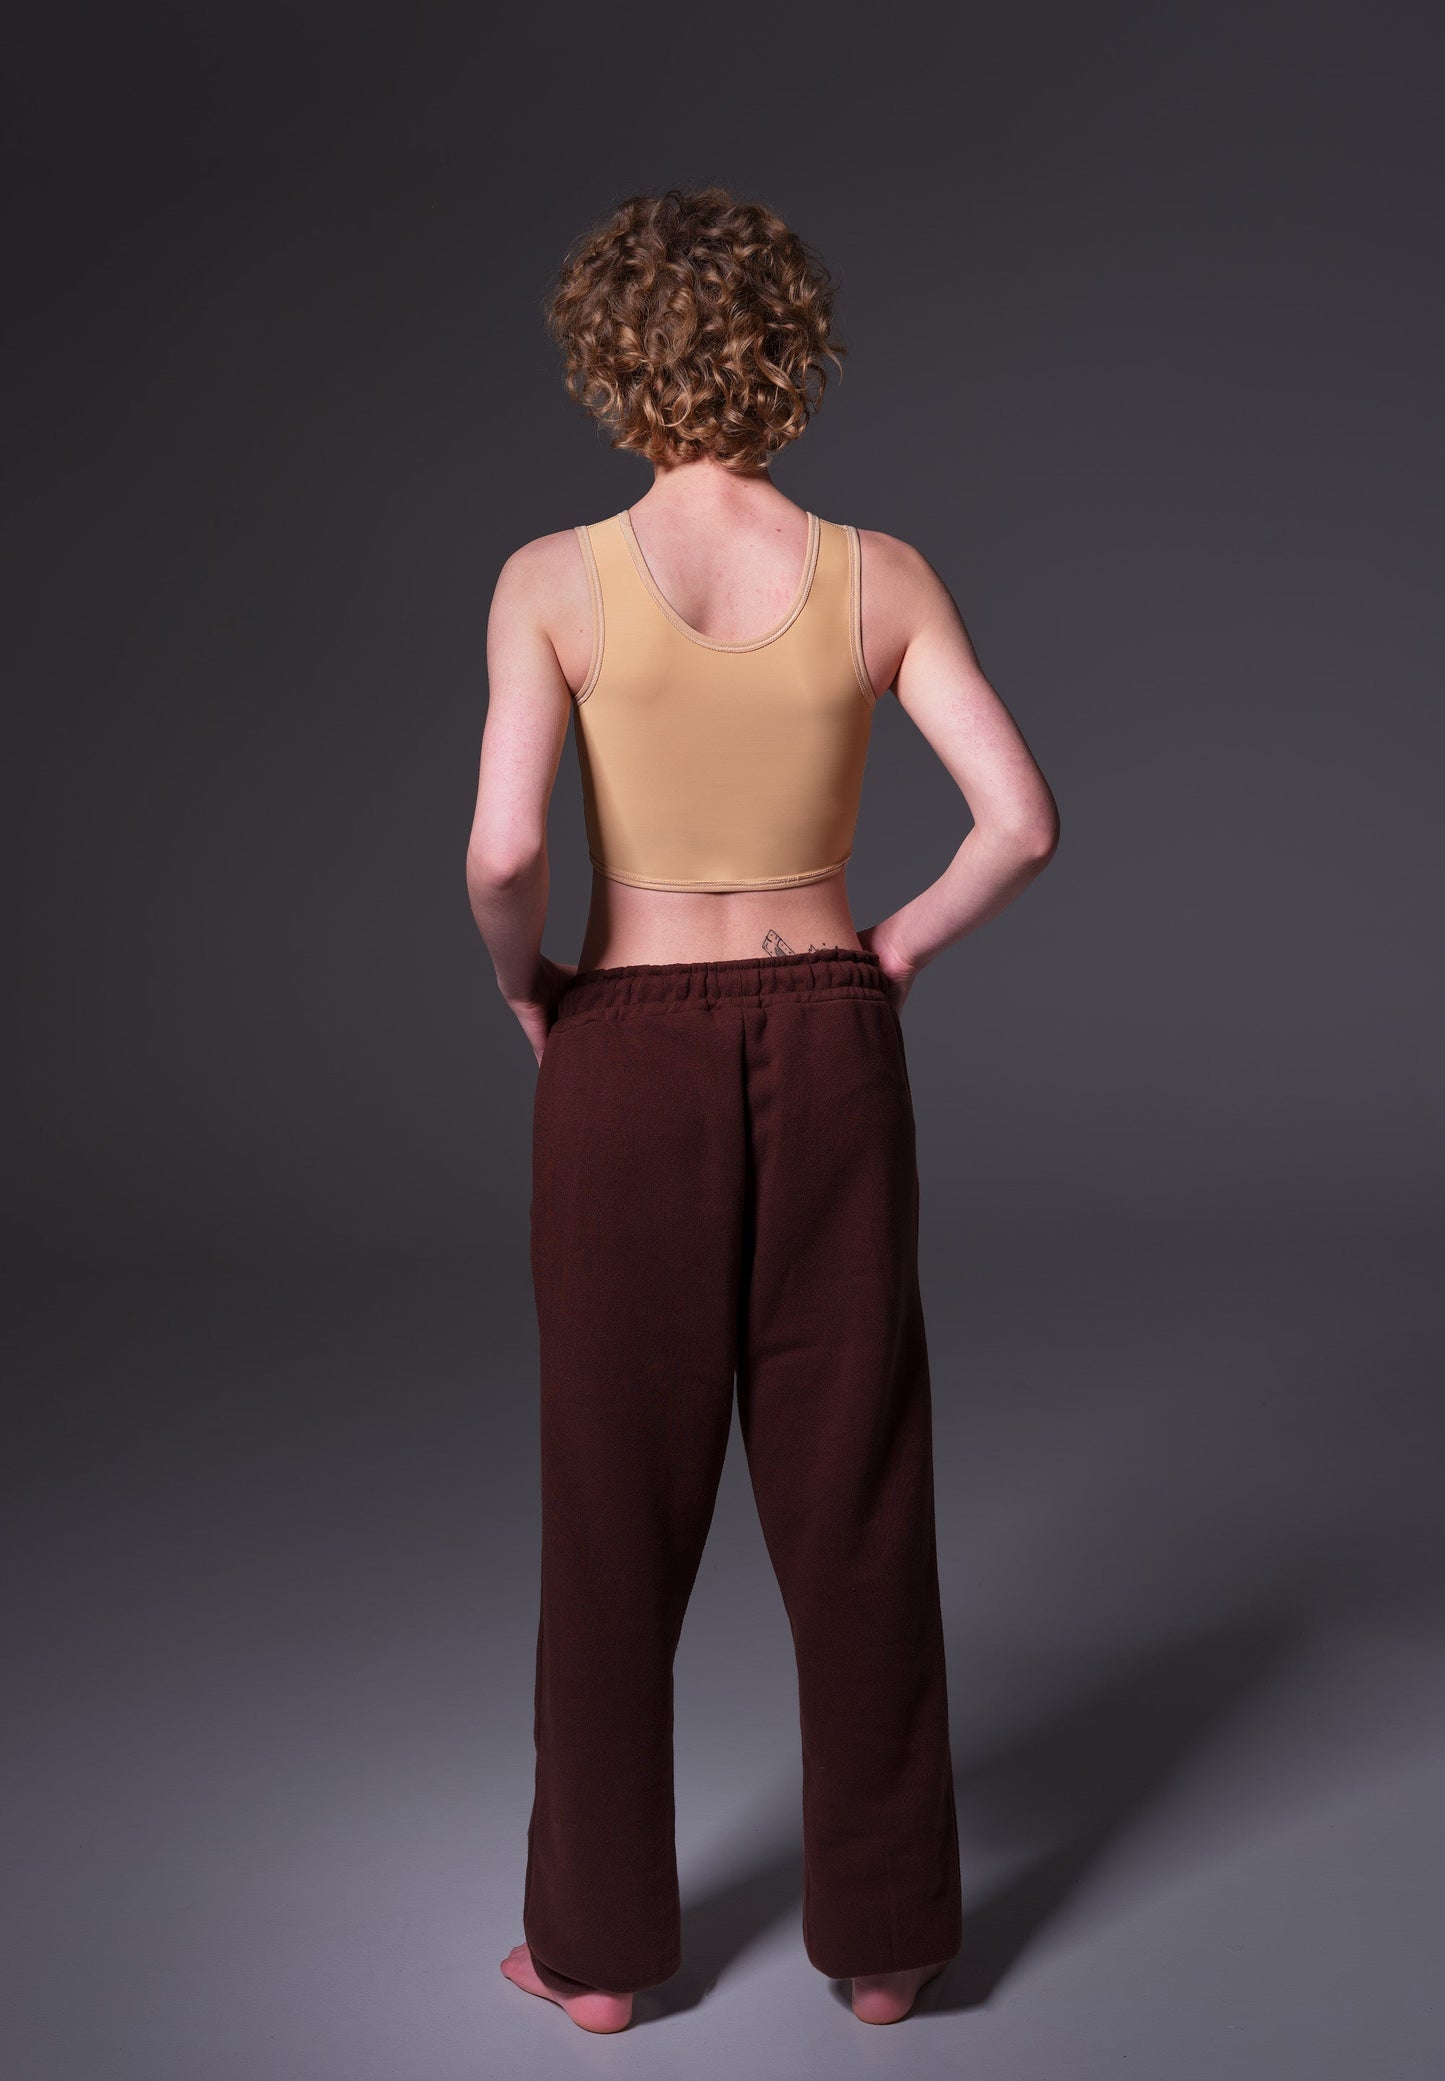 Back view of the short binder worn by Lo in the color caramel